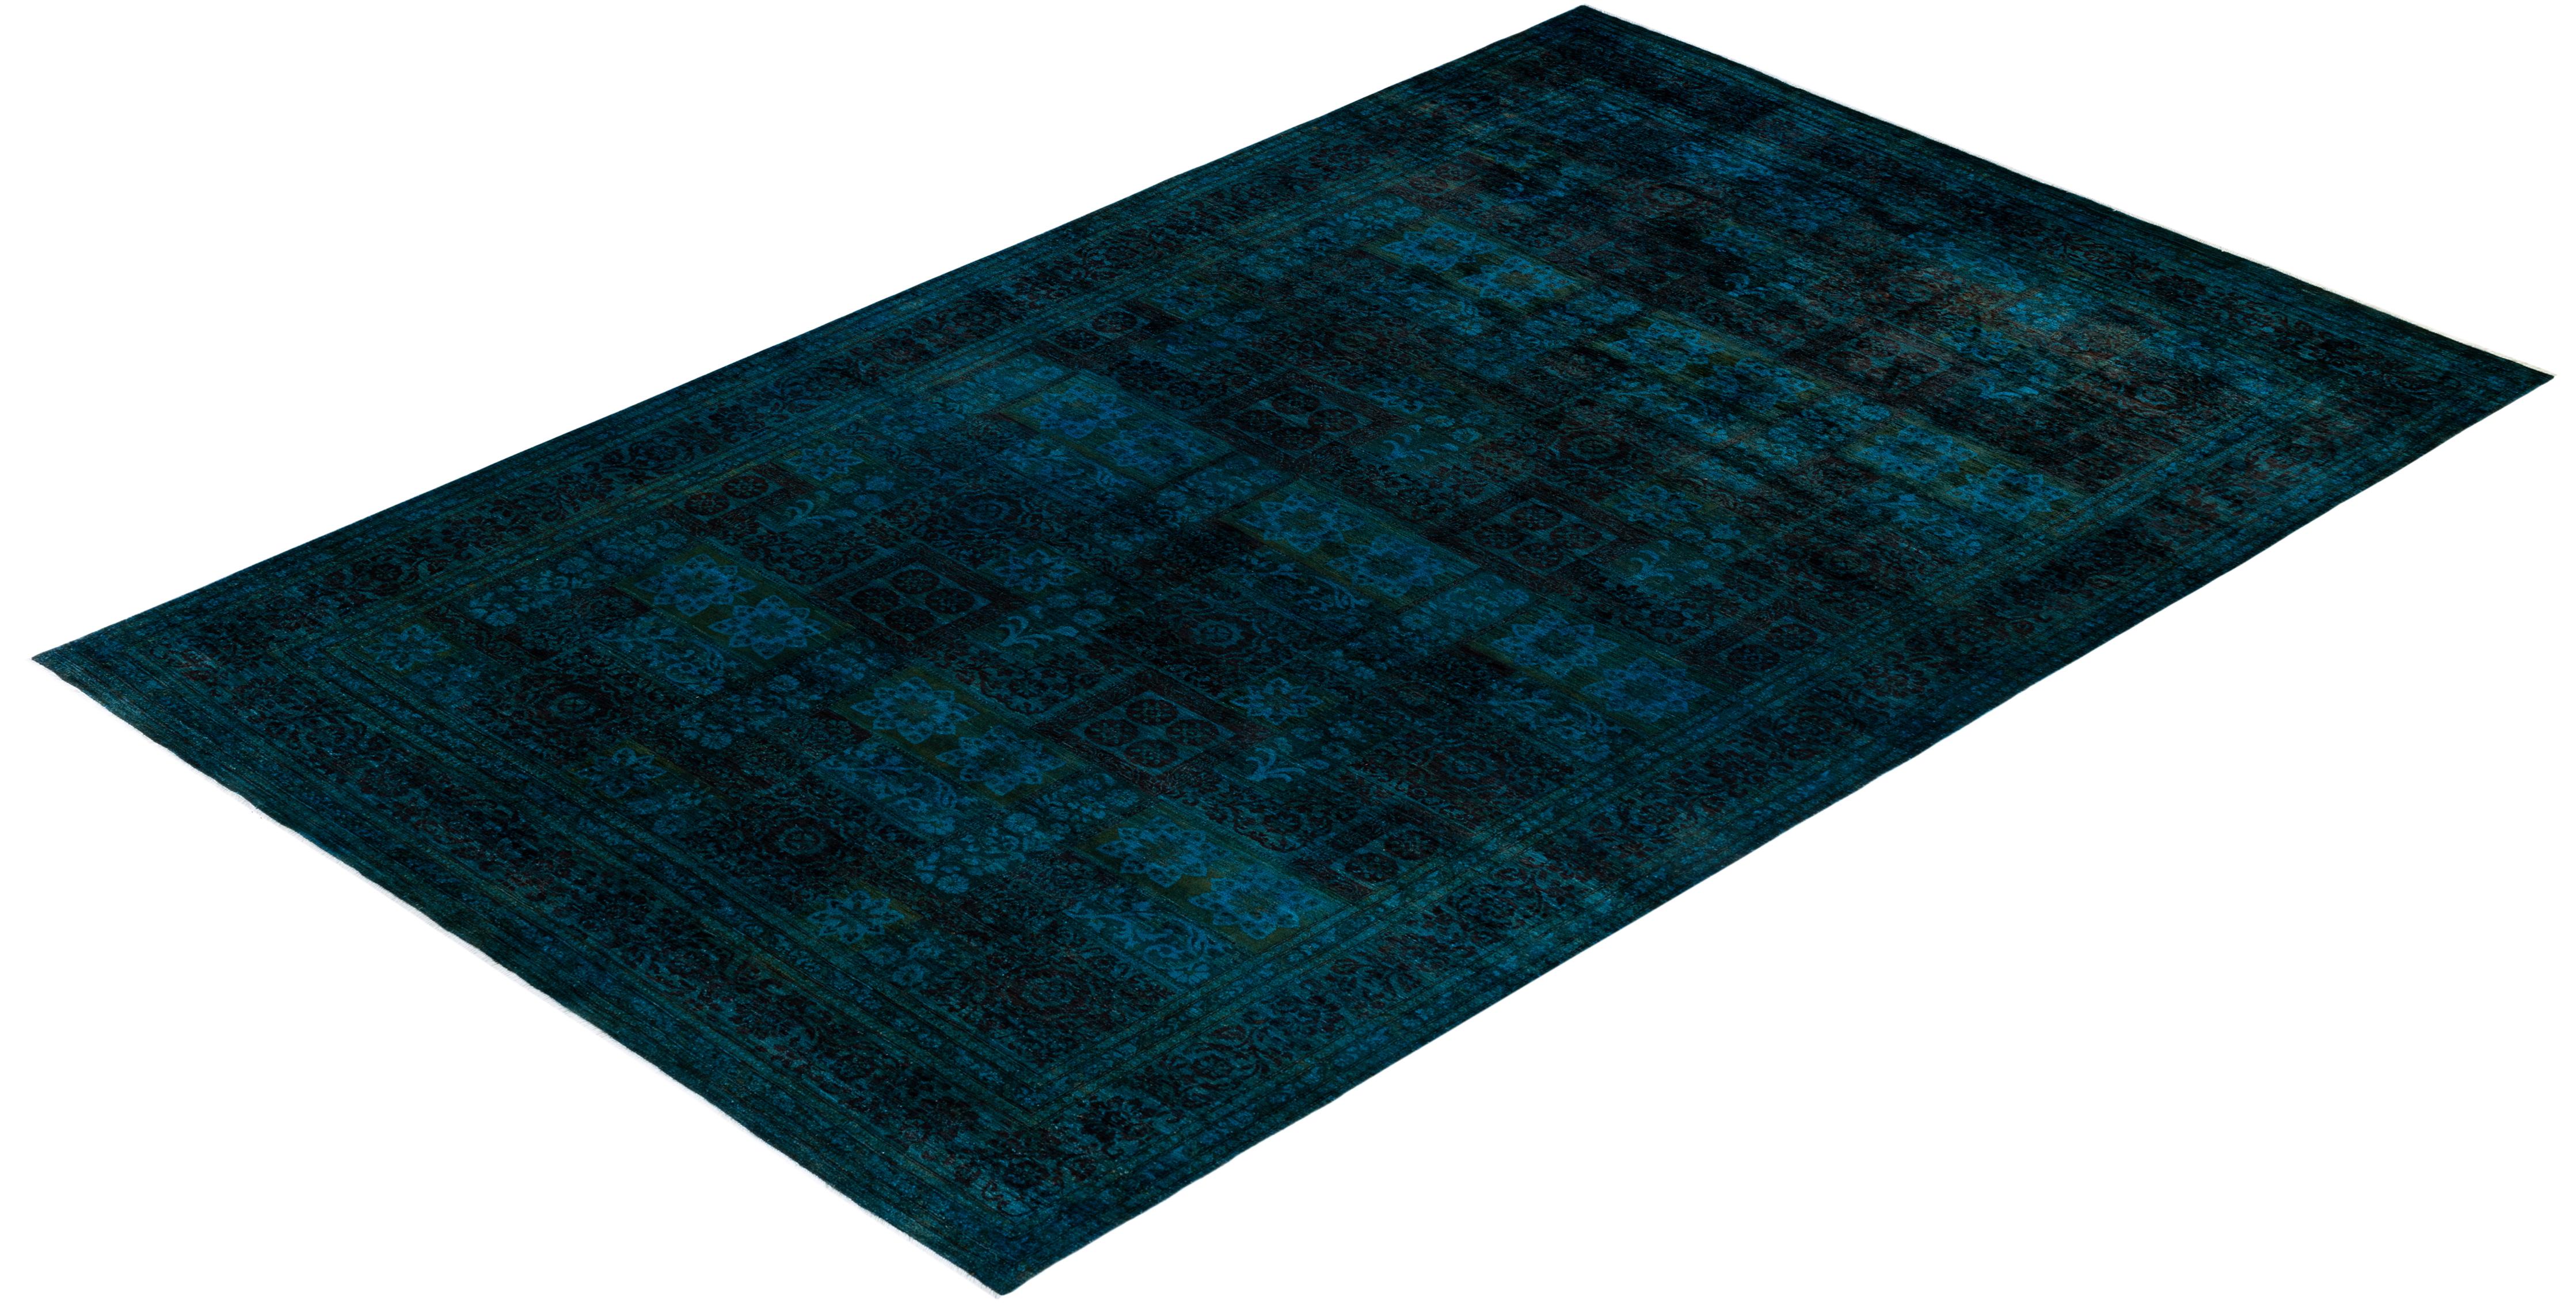 Contemporary Suzani Hand Knotted Wool Blue Area Rug im Angebot 2